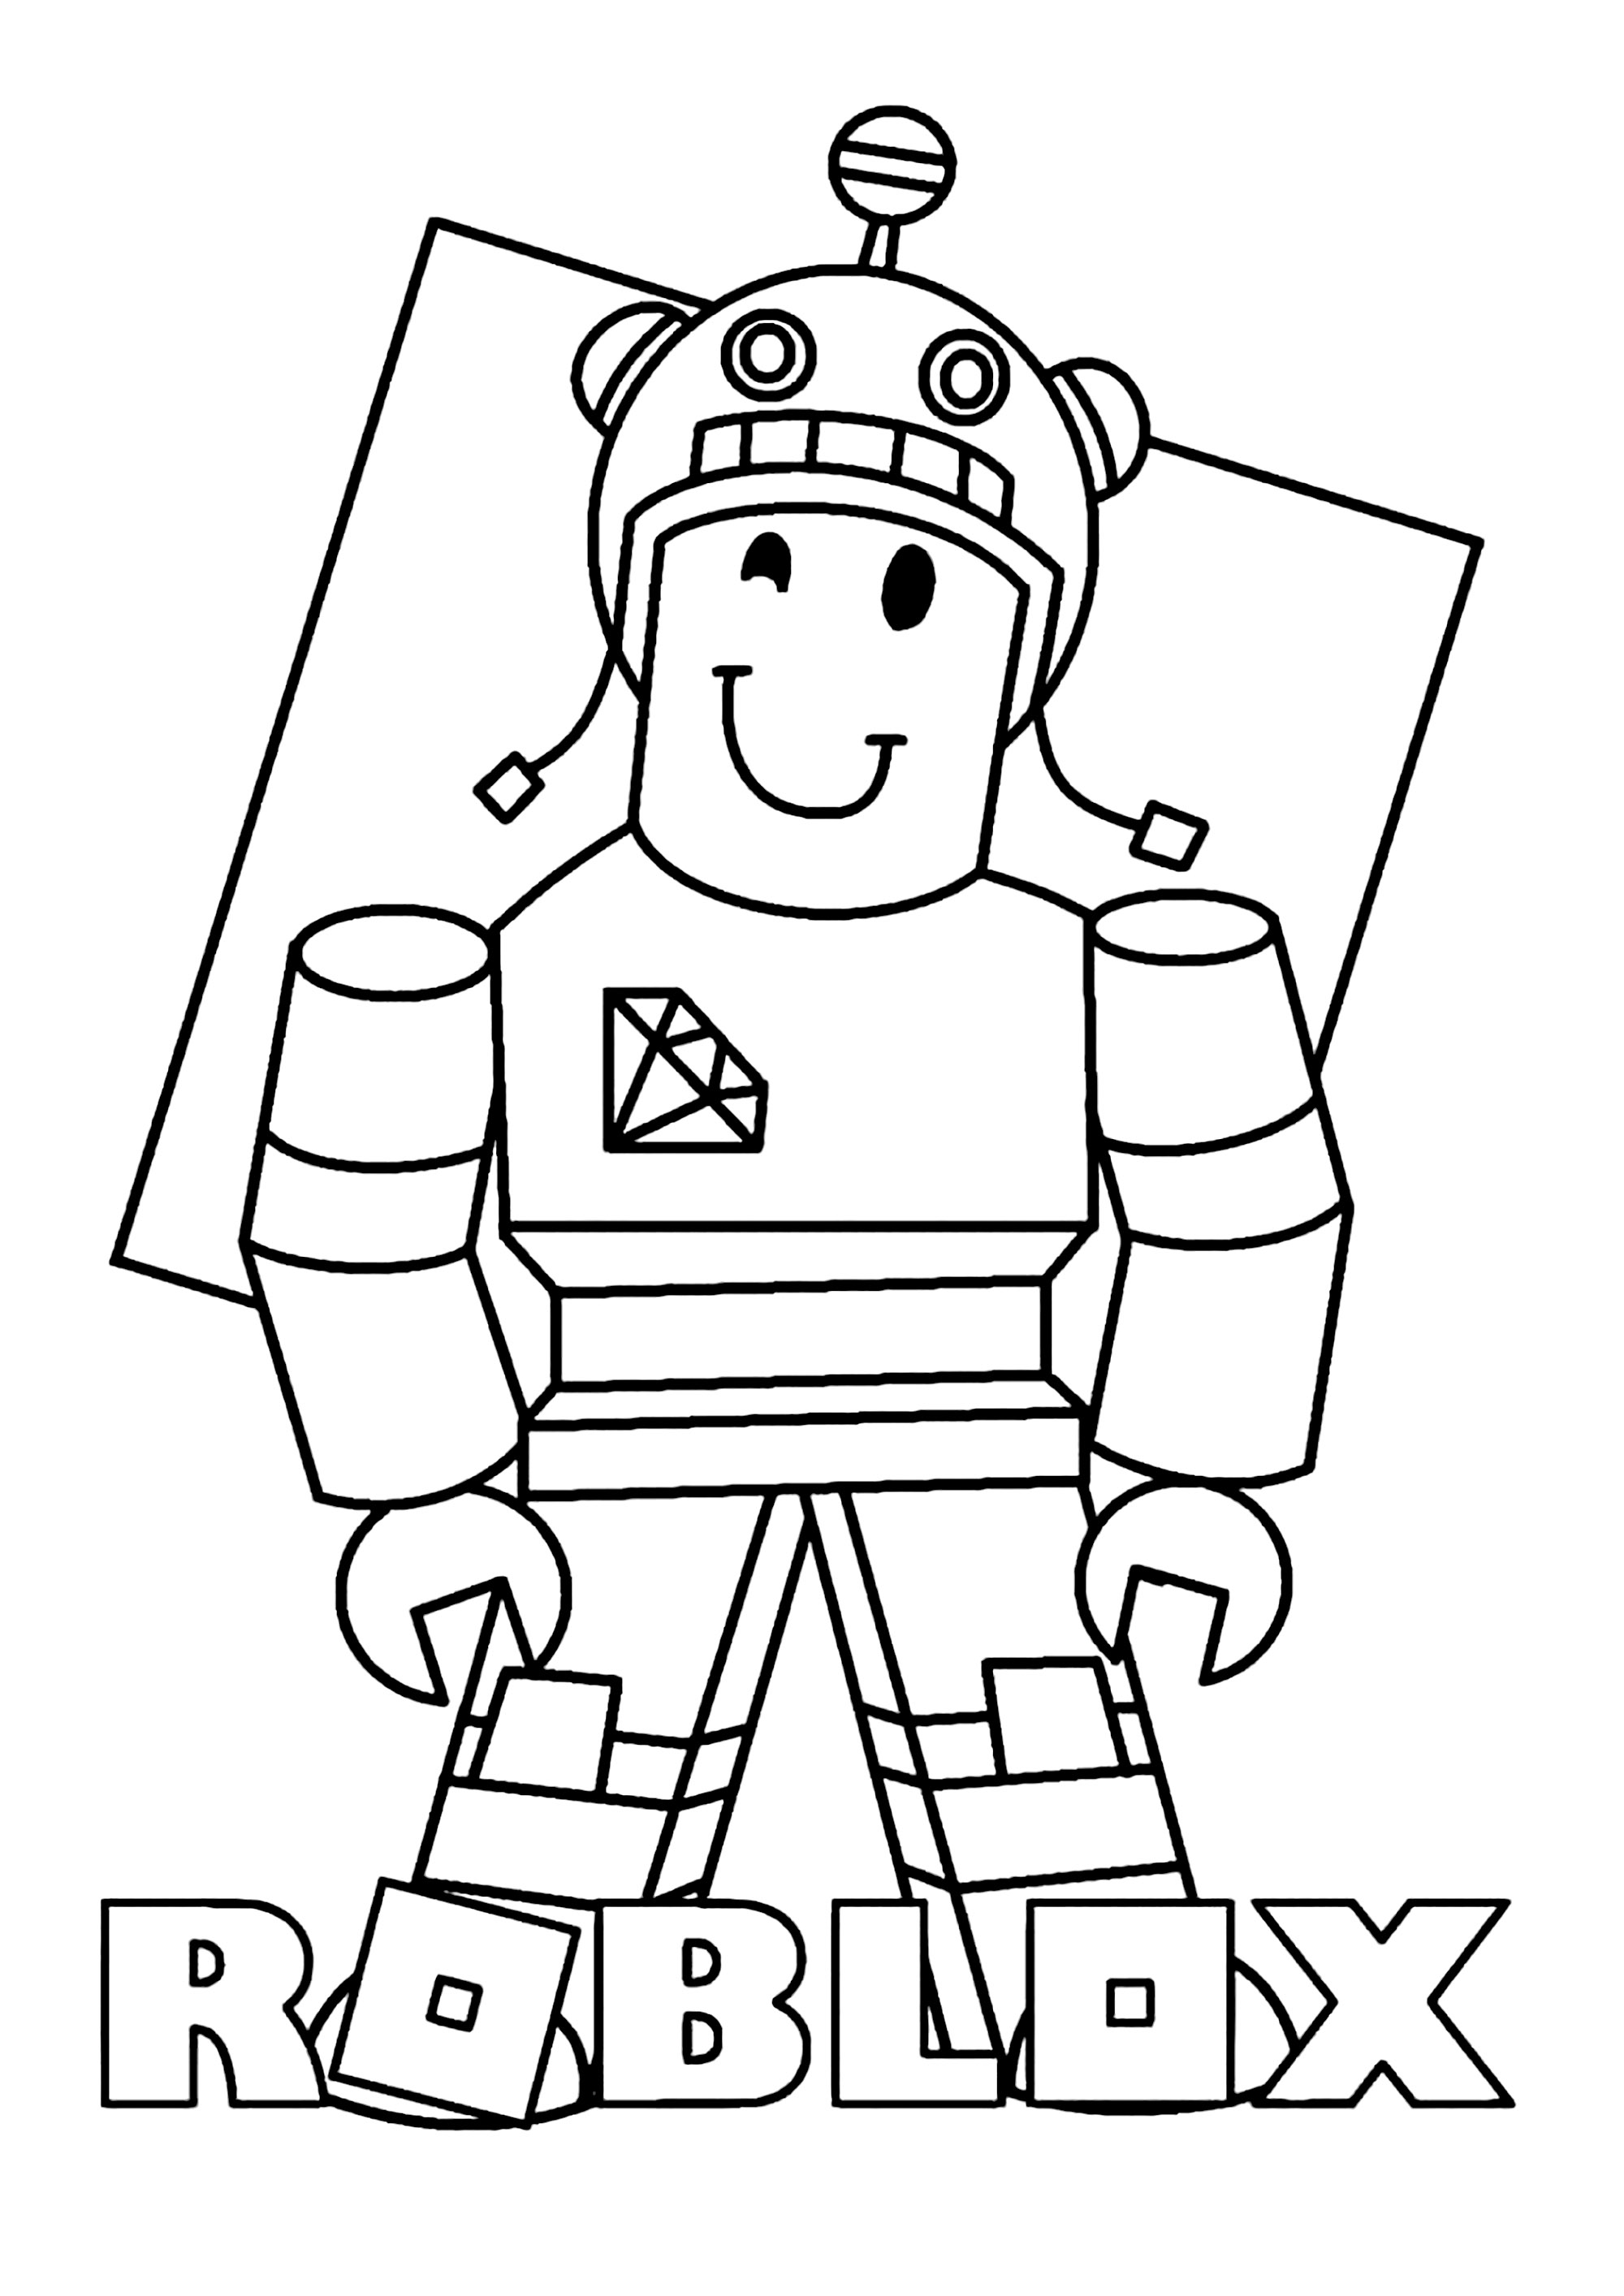 Roblox: character with a helmet - Roblox Kids Coloring Pages